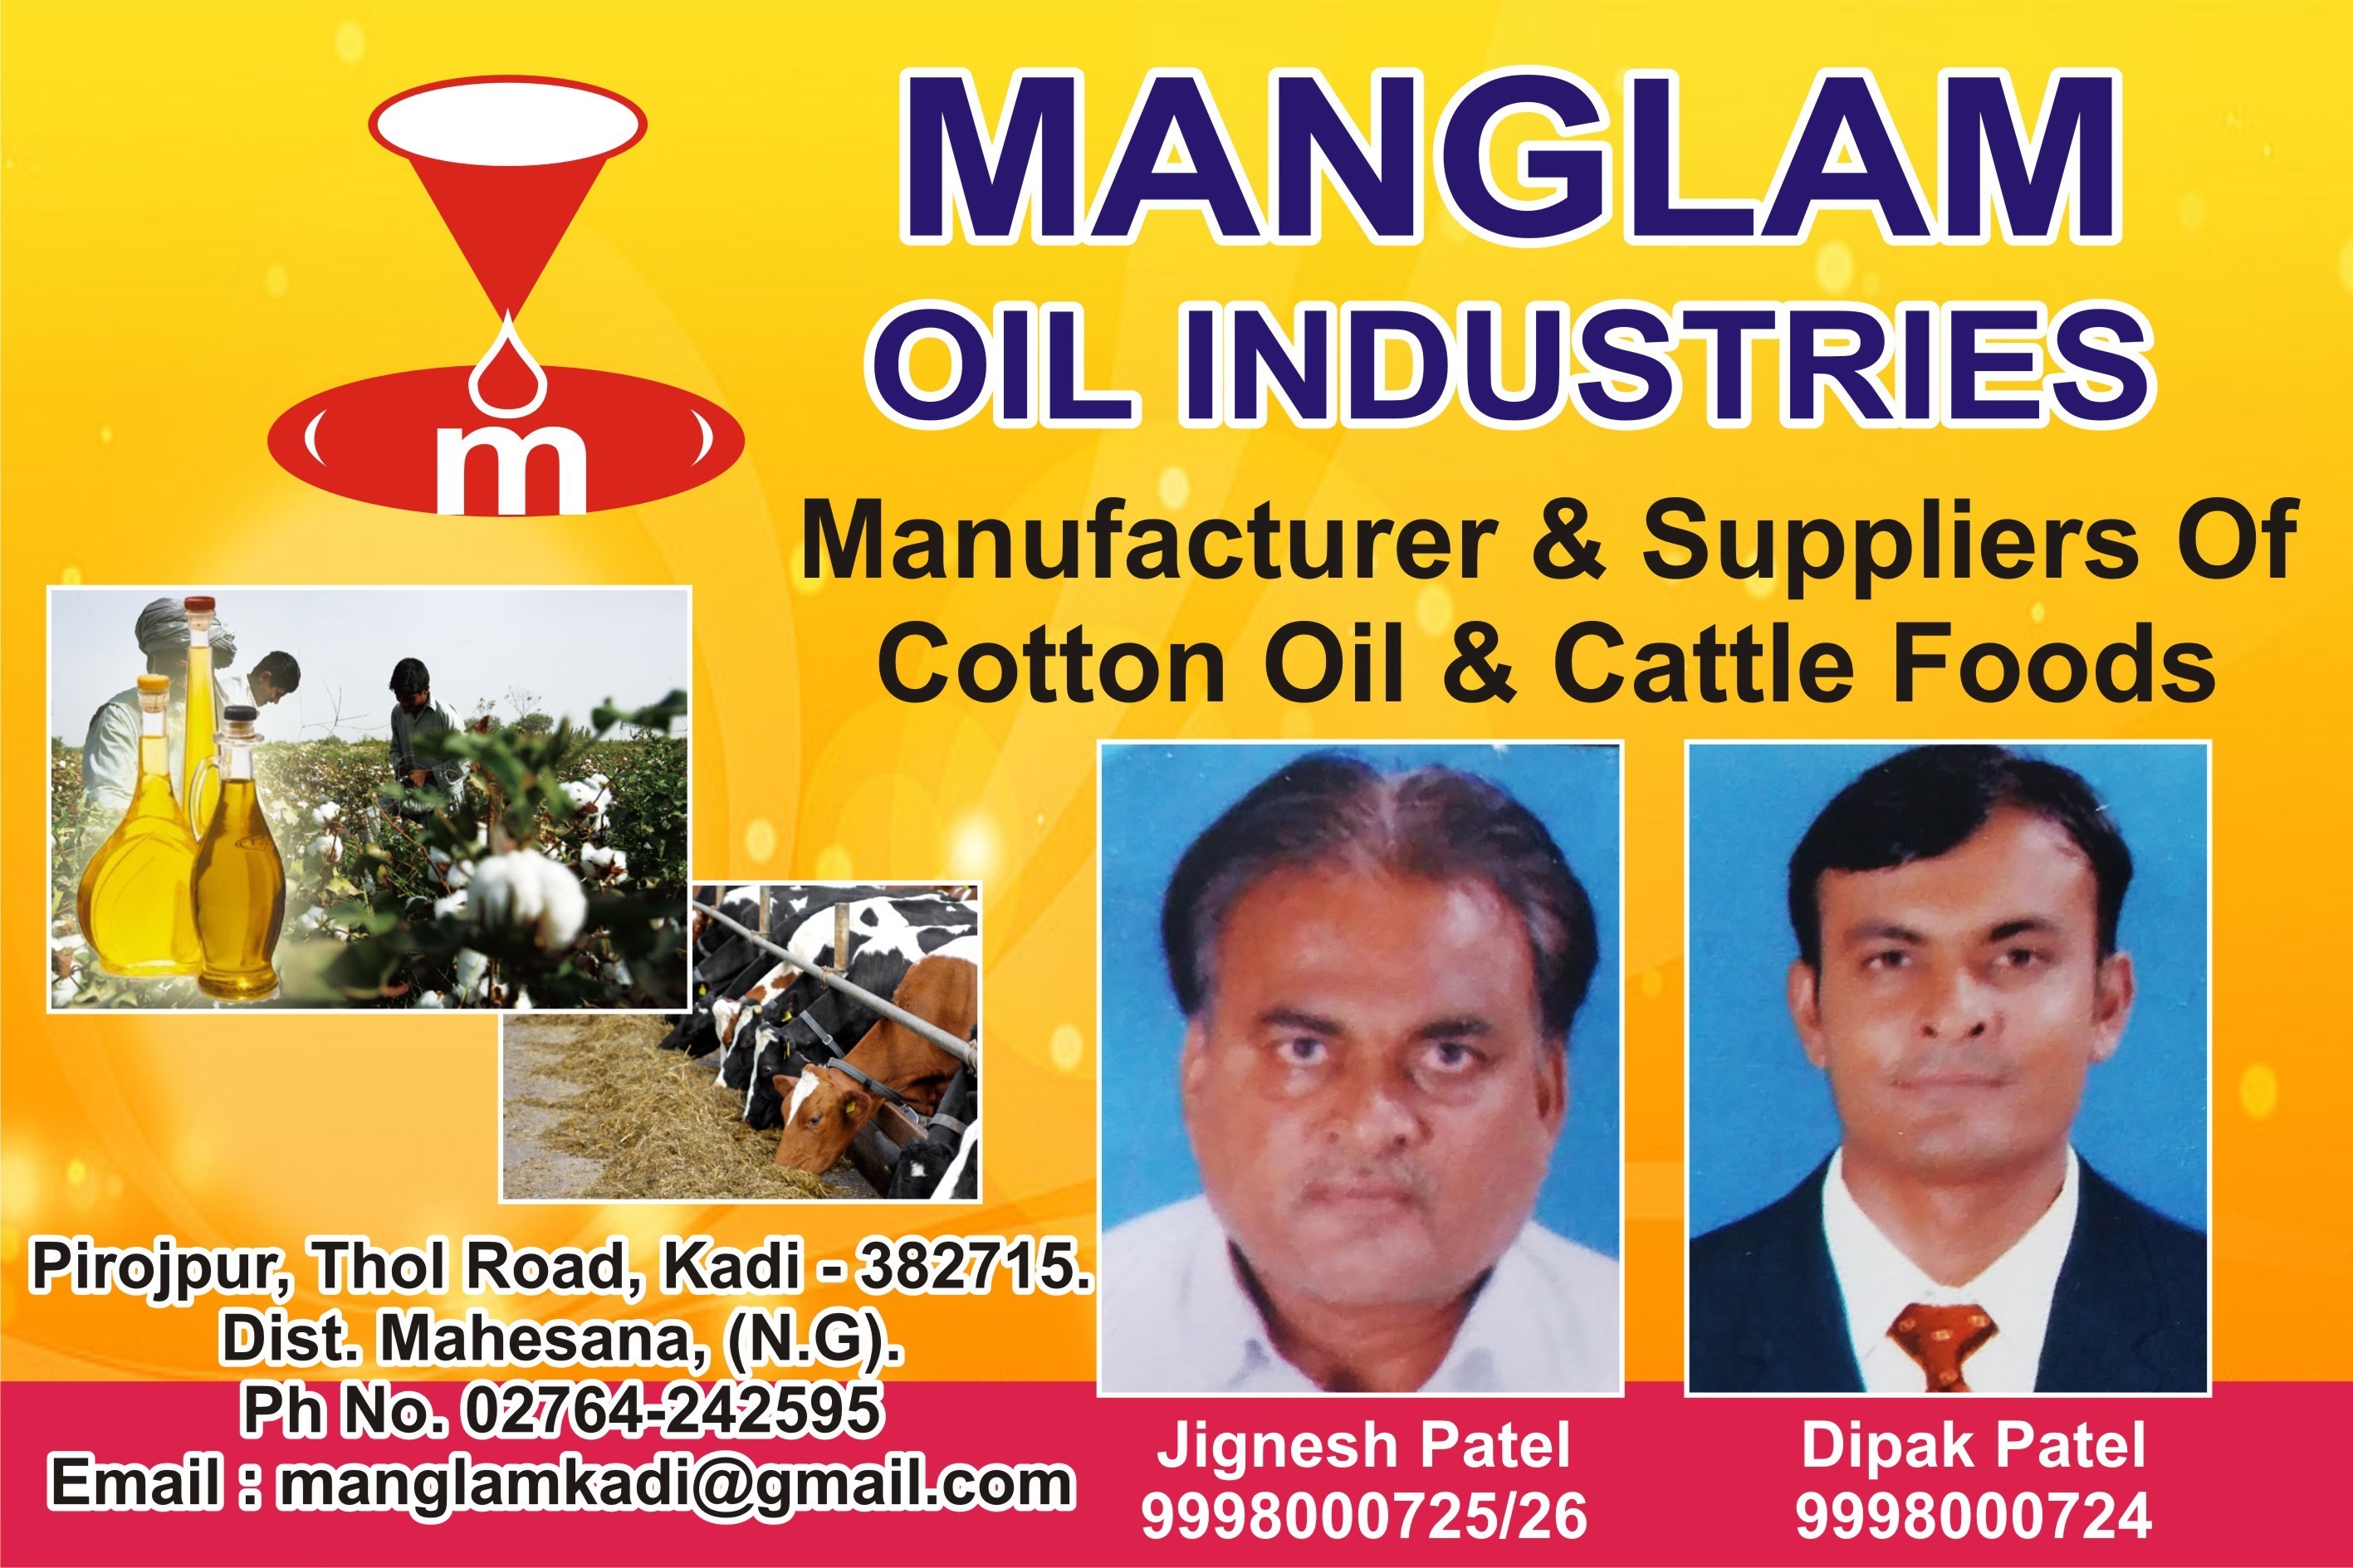 Manglam Oil Industries - Manufacturers and Suppliers of Cotton Oil and Cattle Foods